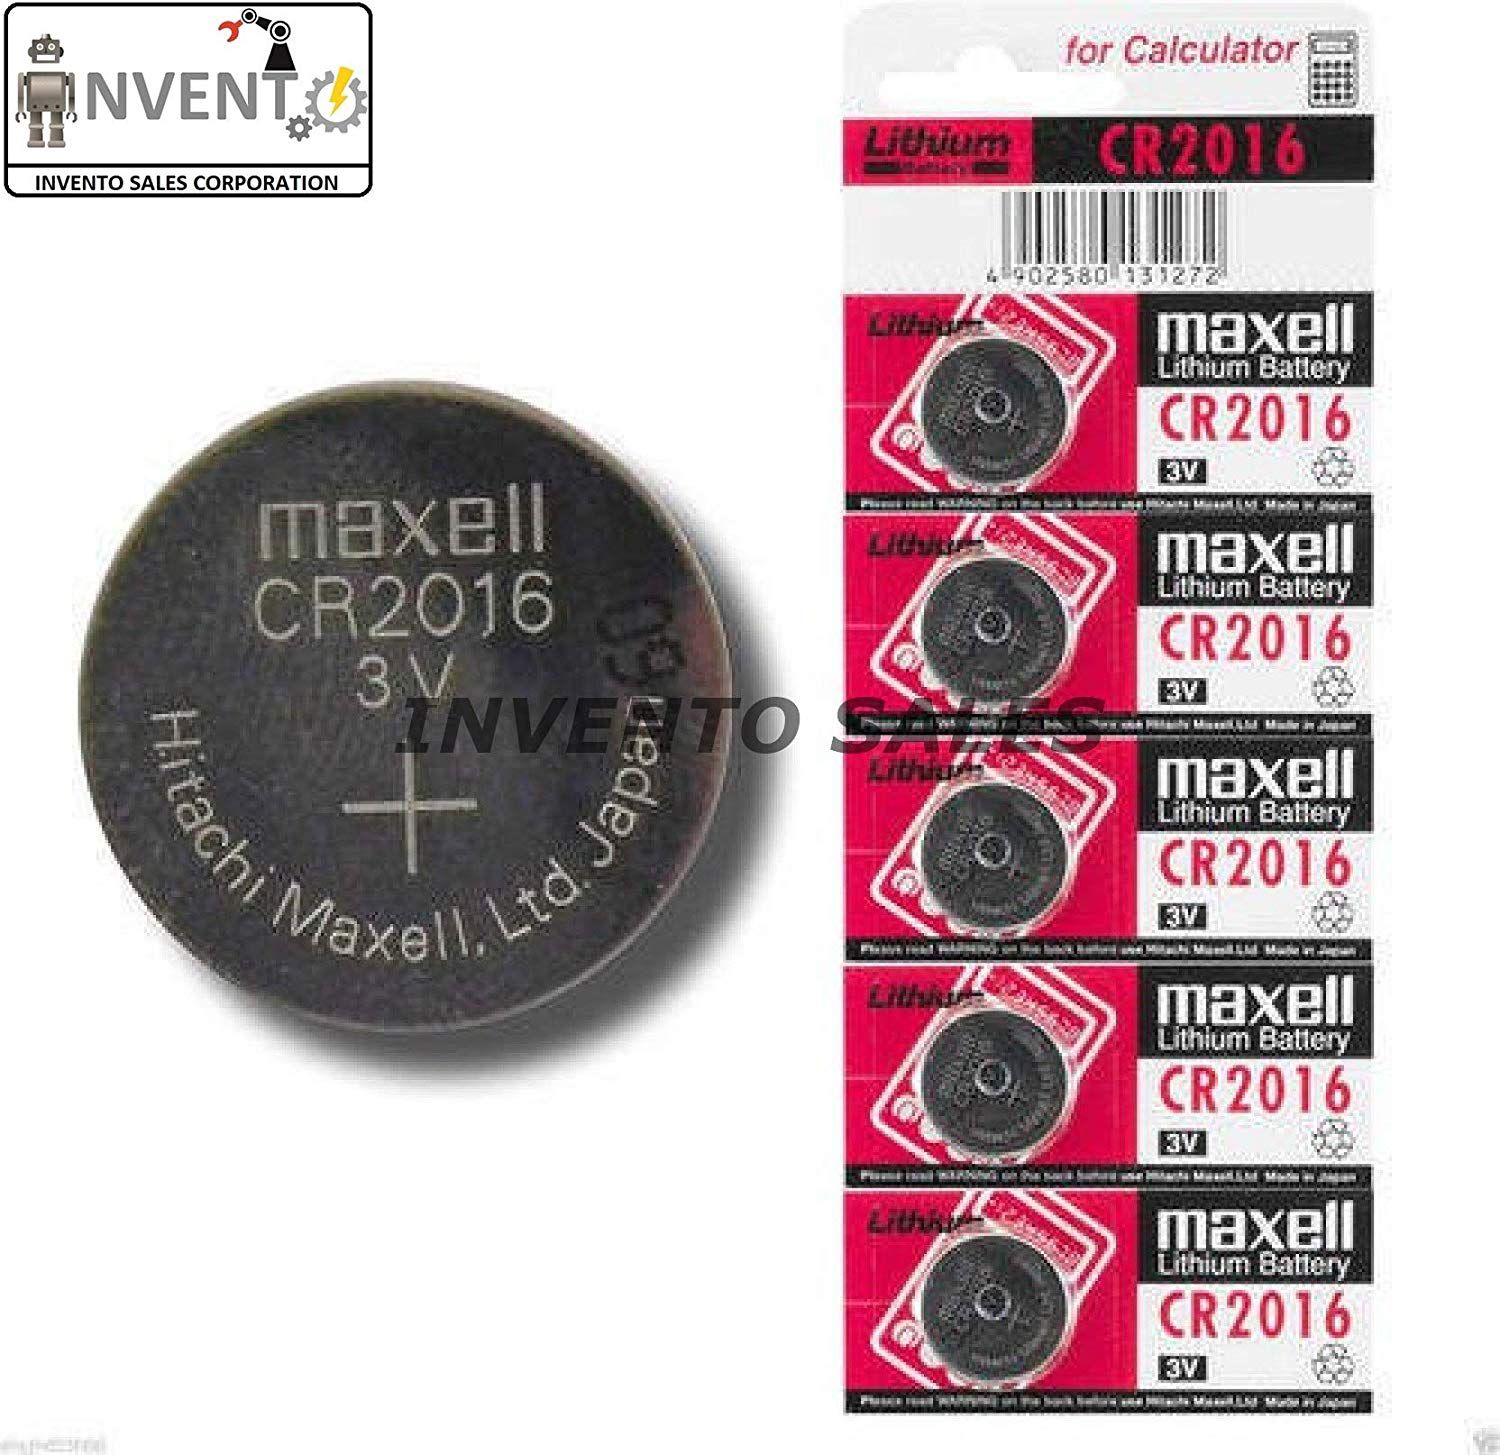 Invento 5pcs 3V CR2016 Li-ion Battery (Non-Rechargeable) CR 2016 Button Coin Cell Battery for Calculator Watch Electonic Devices